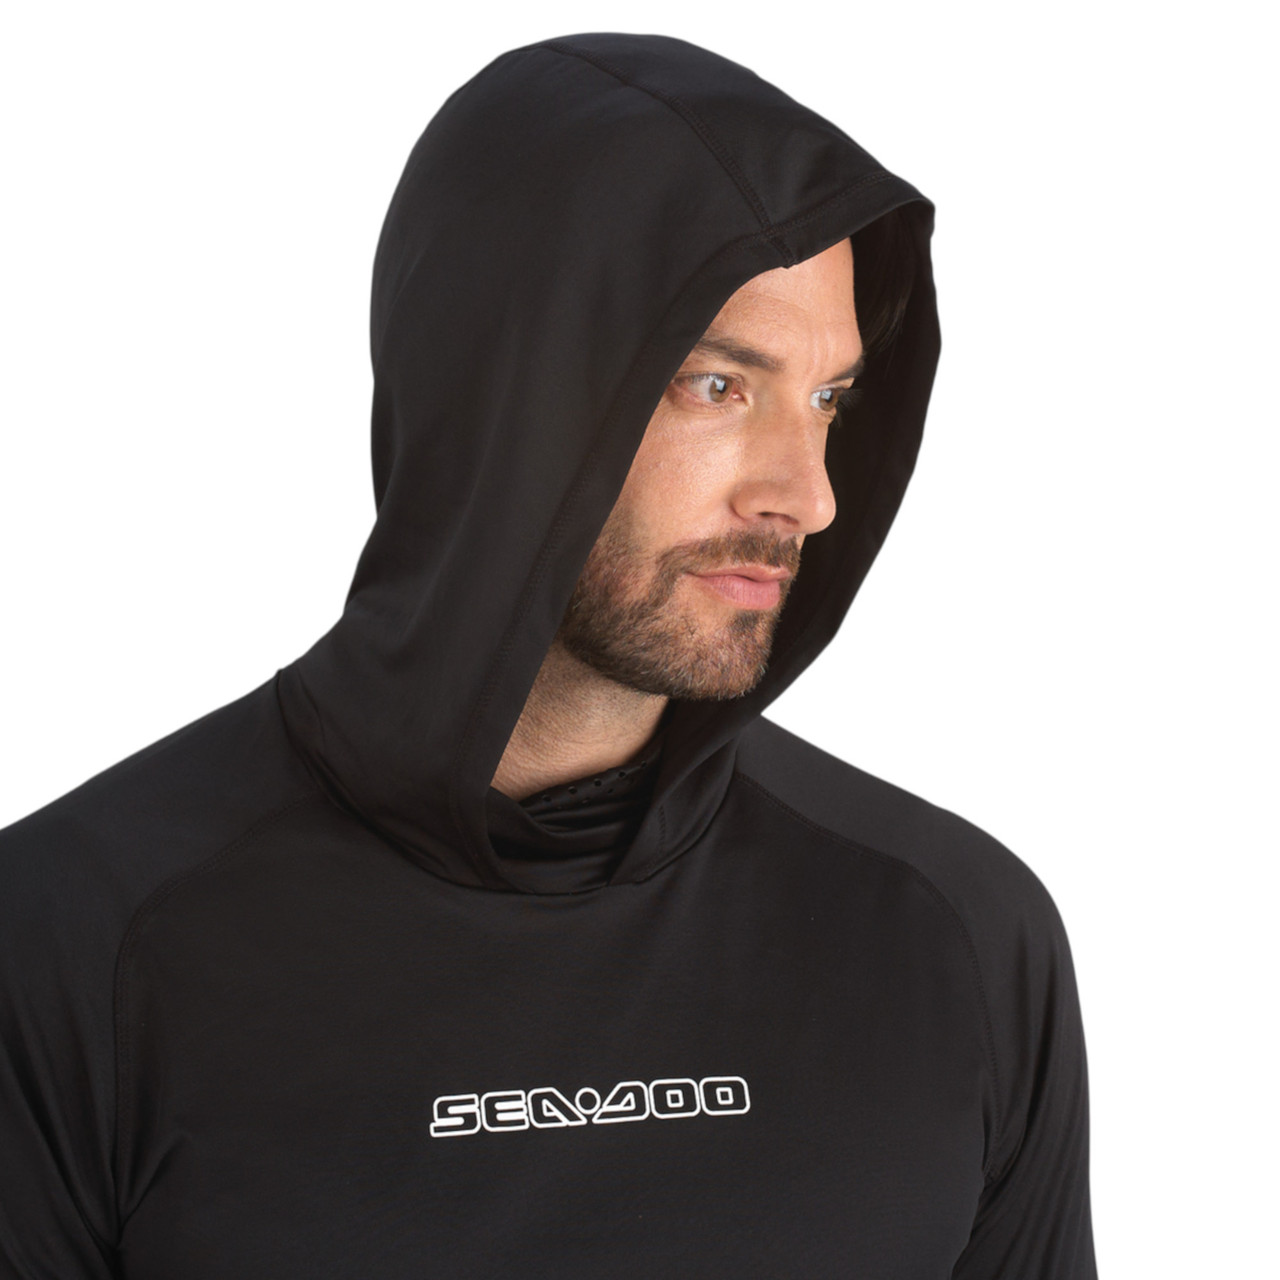 Sea-Doo New OEM, Men's Small Cooling UV Protection Hooded Shirt, 4546590490